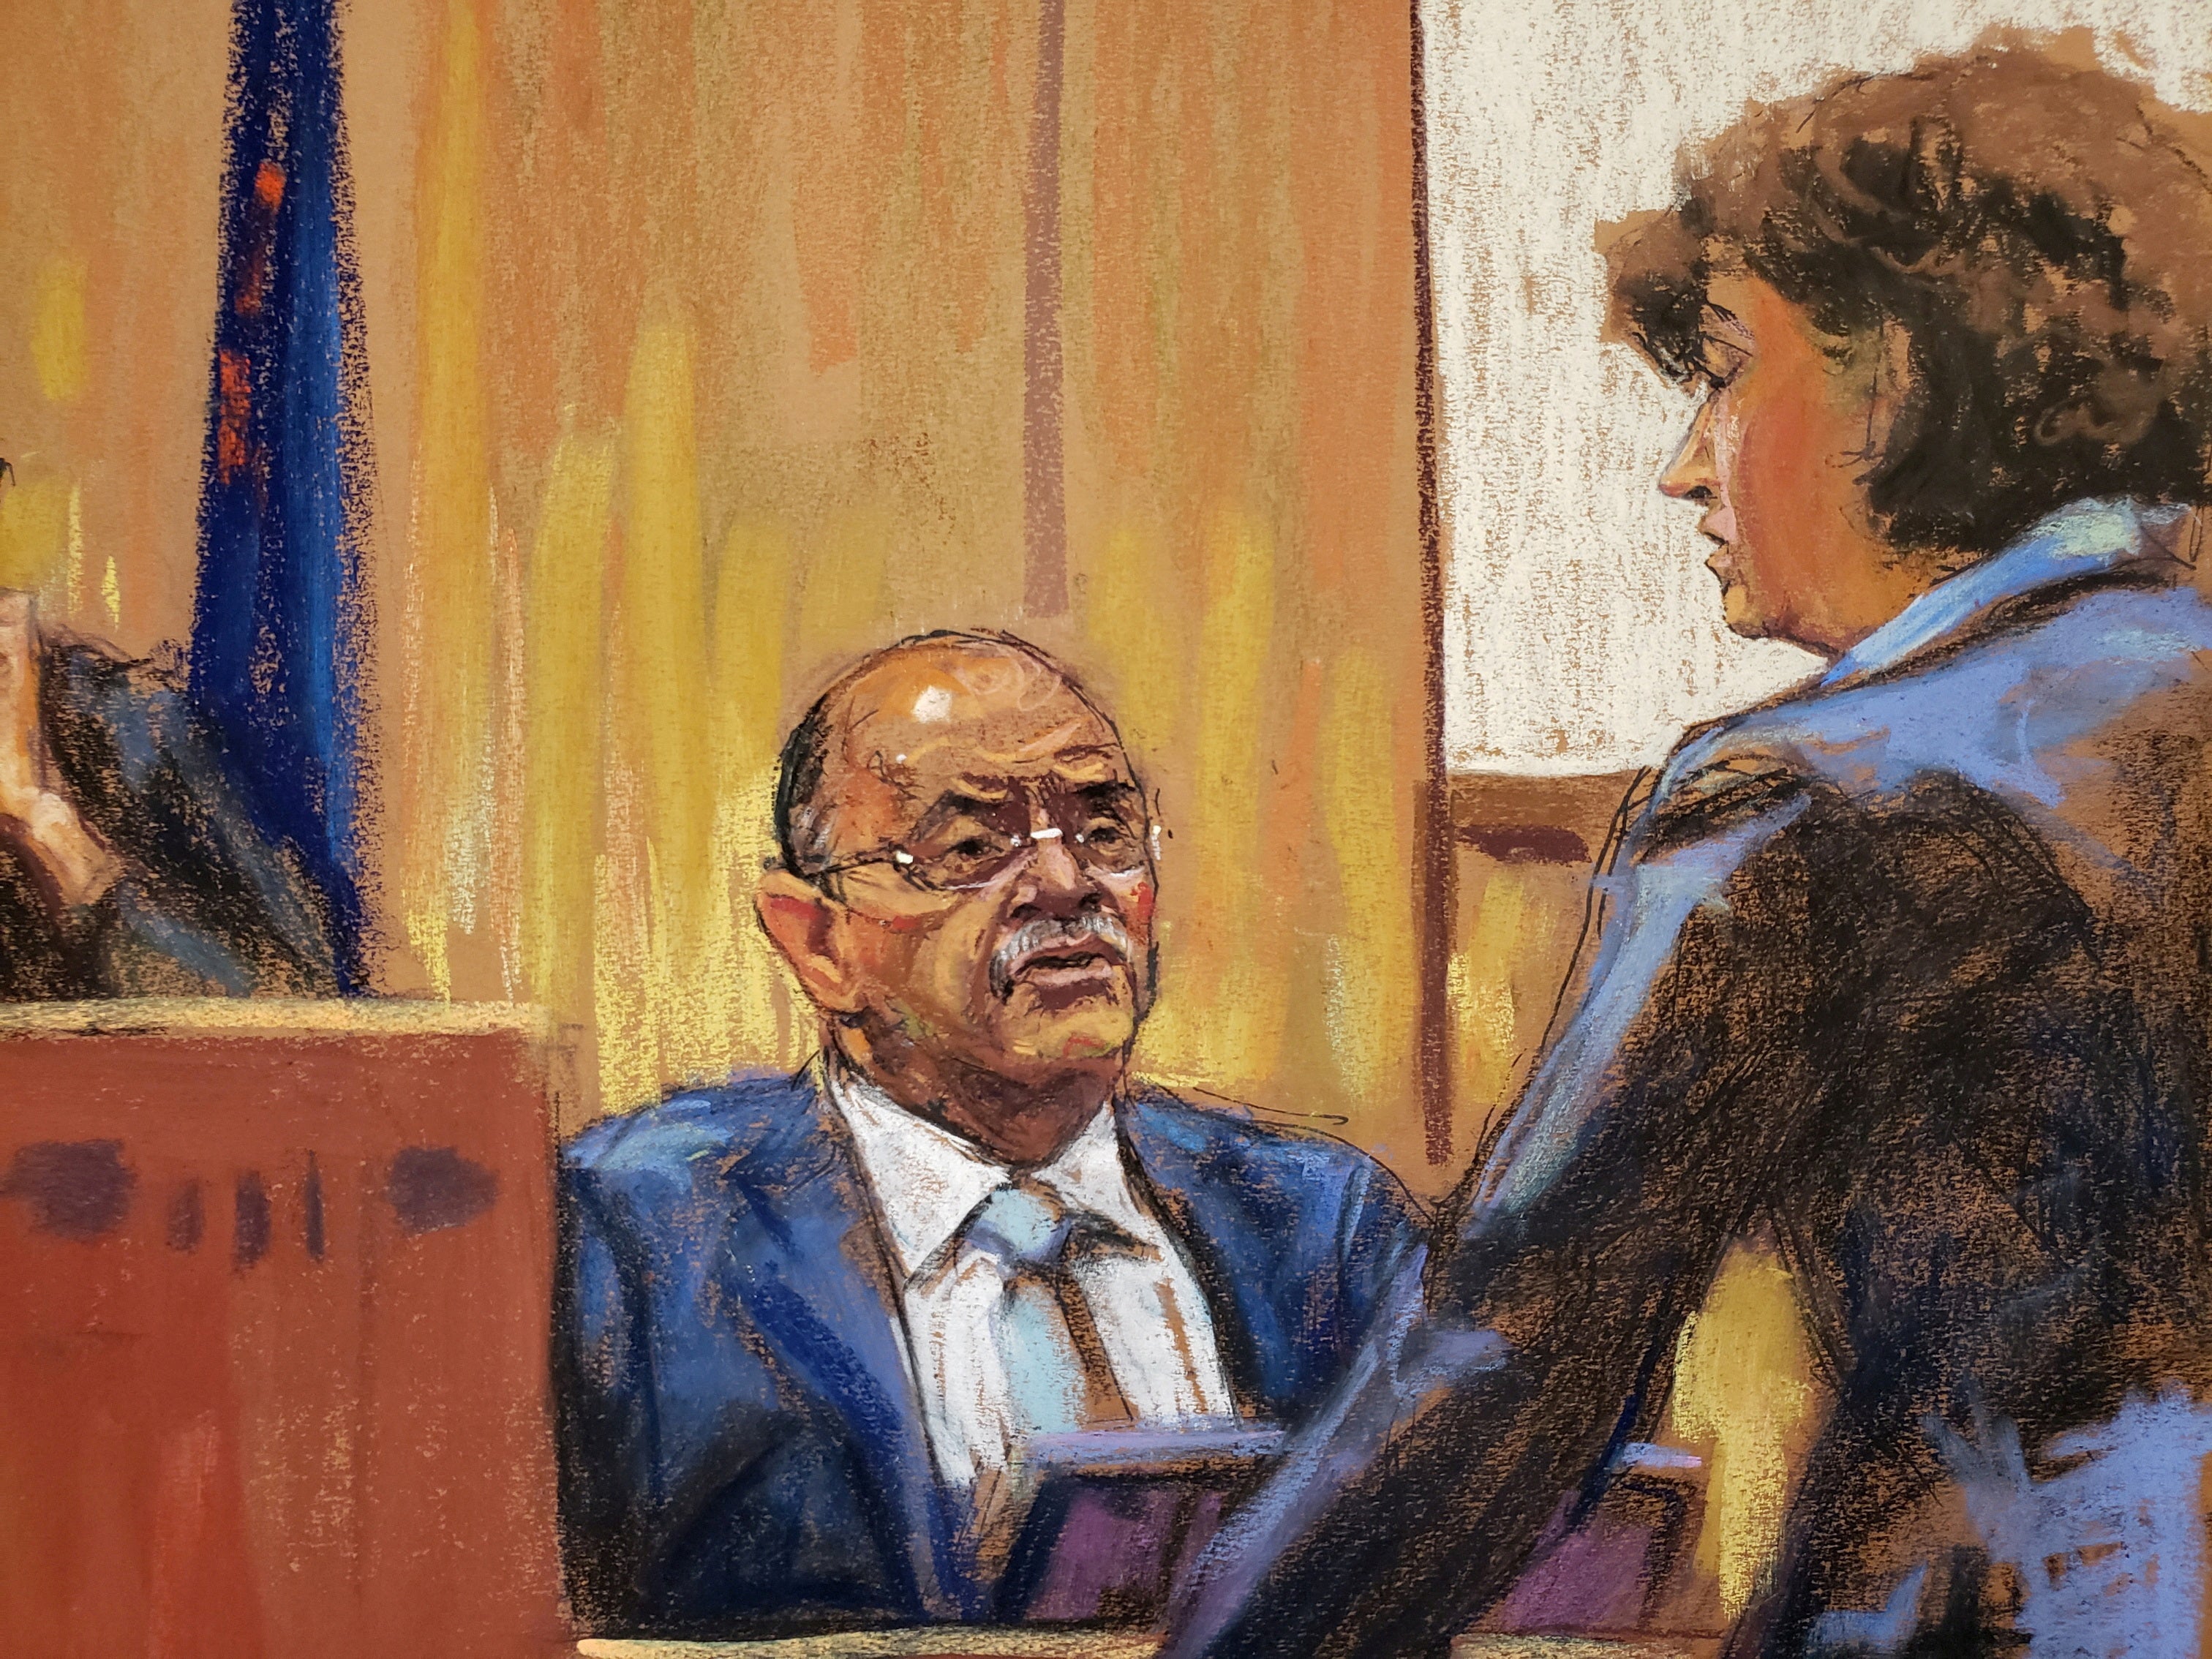 A courtroom sketch depicts former Trump Organization chief financial officer testifying in a criminal tax fraud trial in New York in 2022